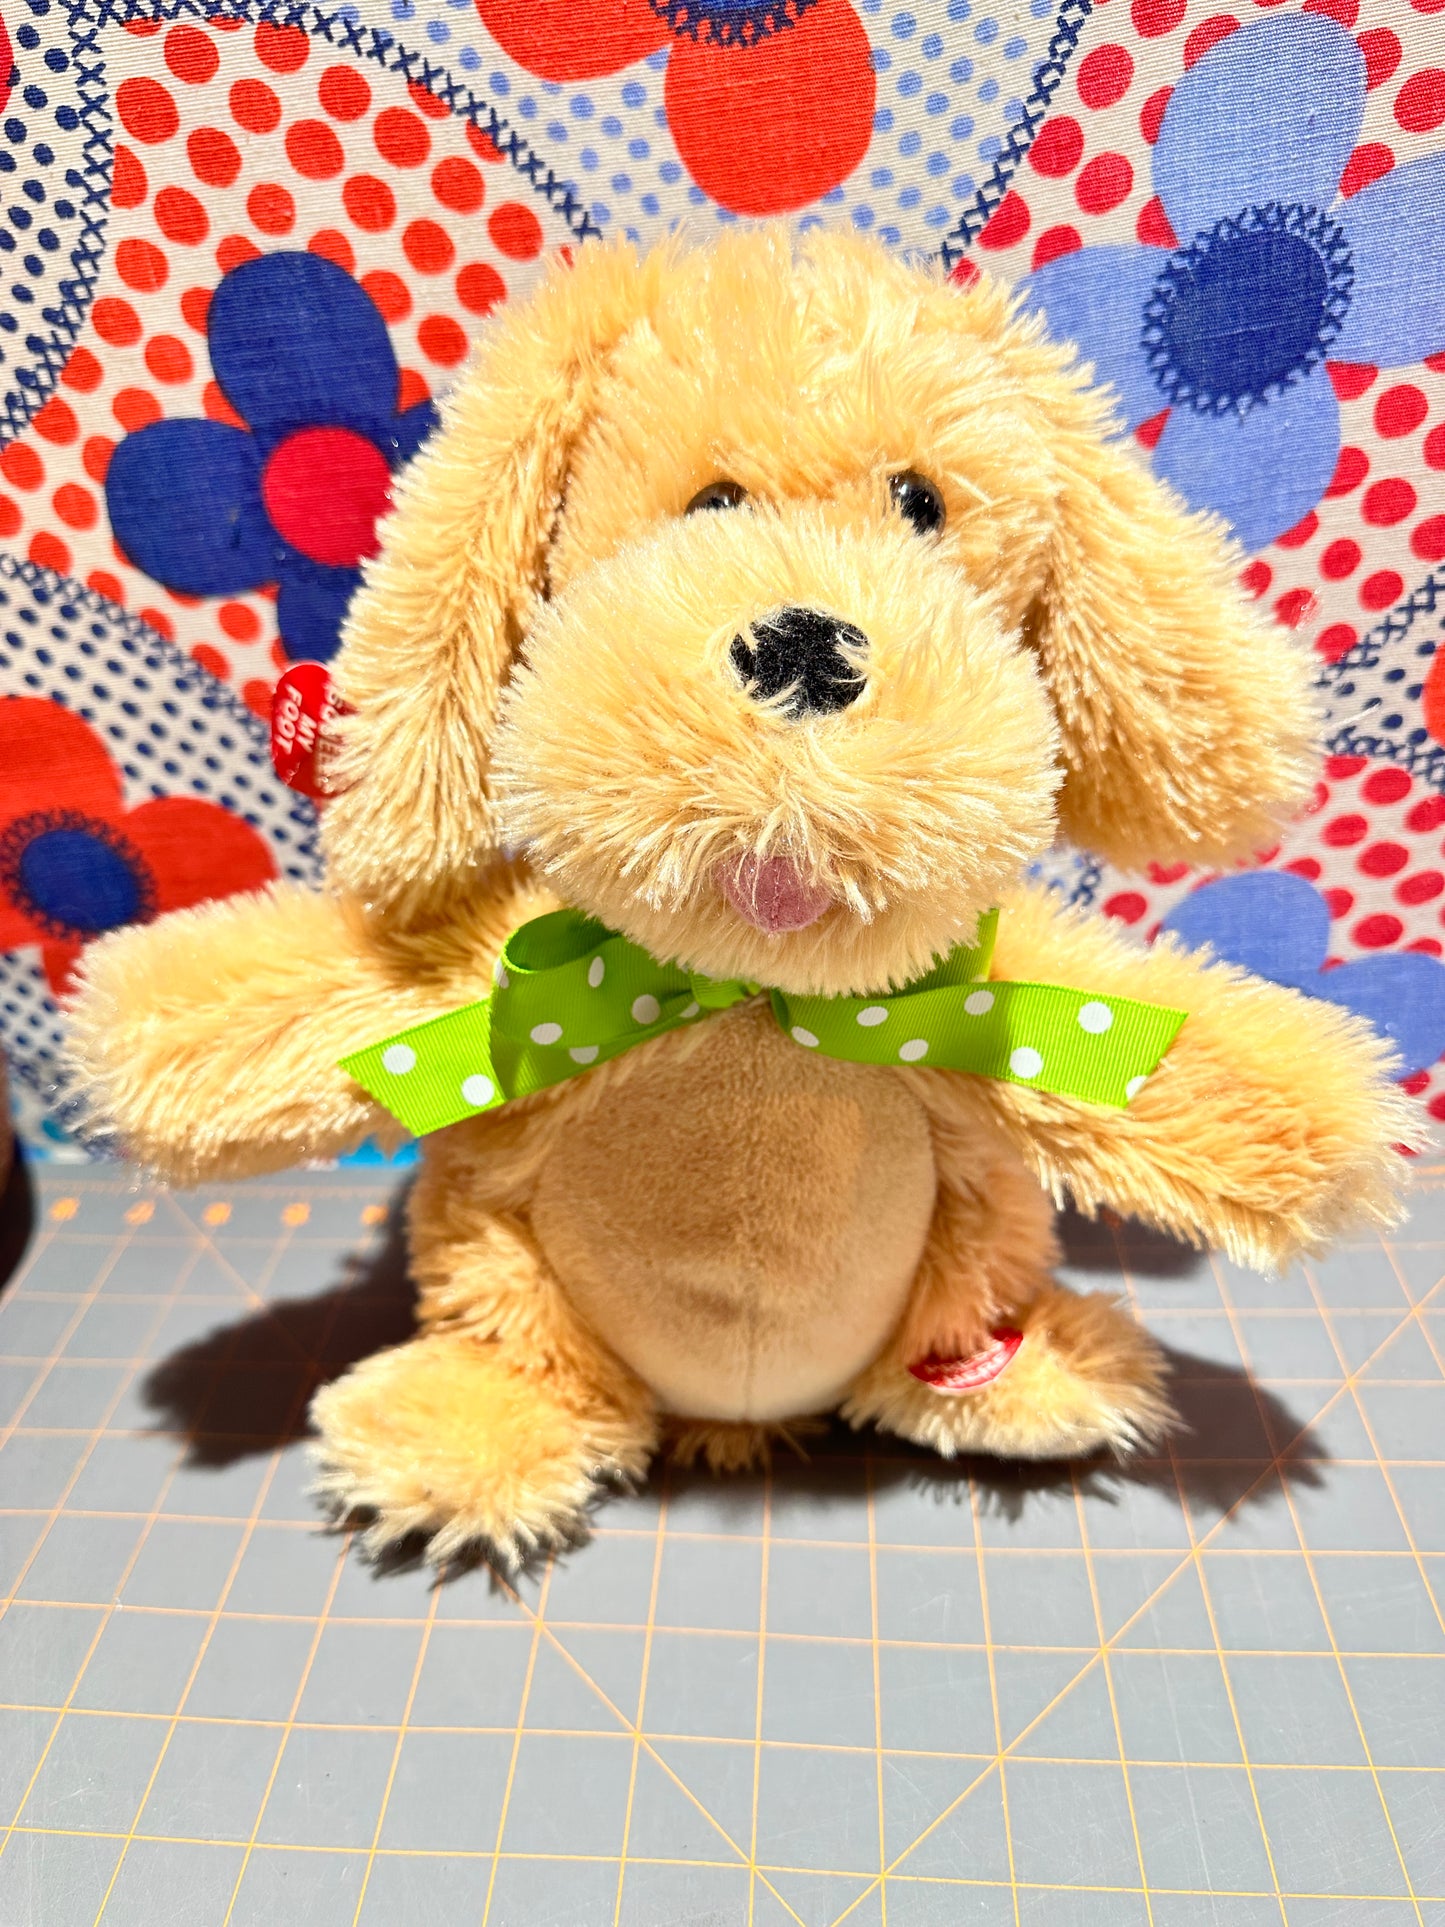 Cuddle Barn Puppy Dog, Animated Sings IF YOU'RE HAPPY AND YOU KNOW IT, 12"